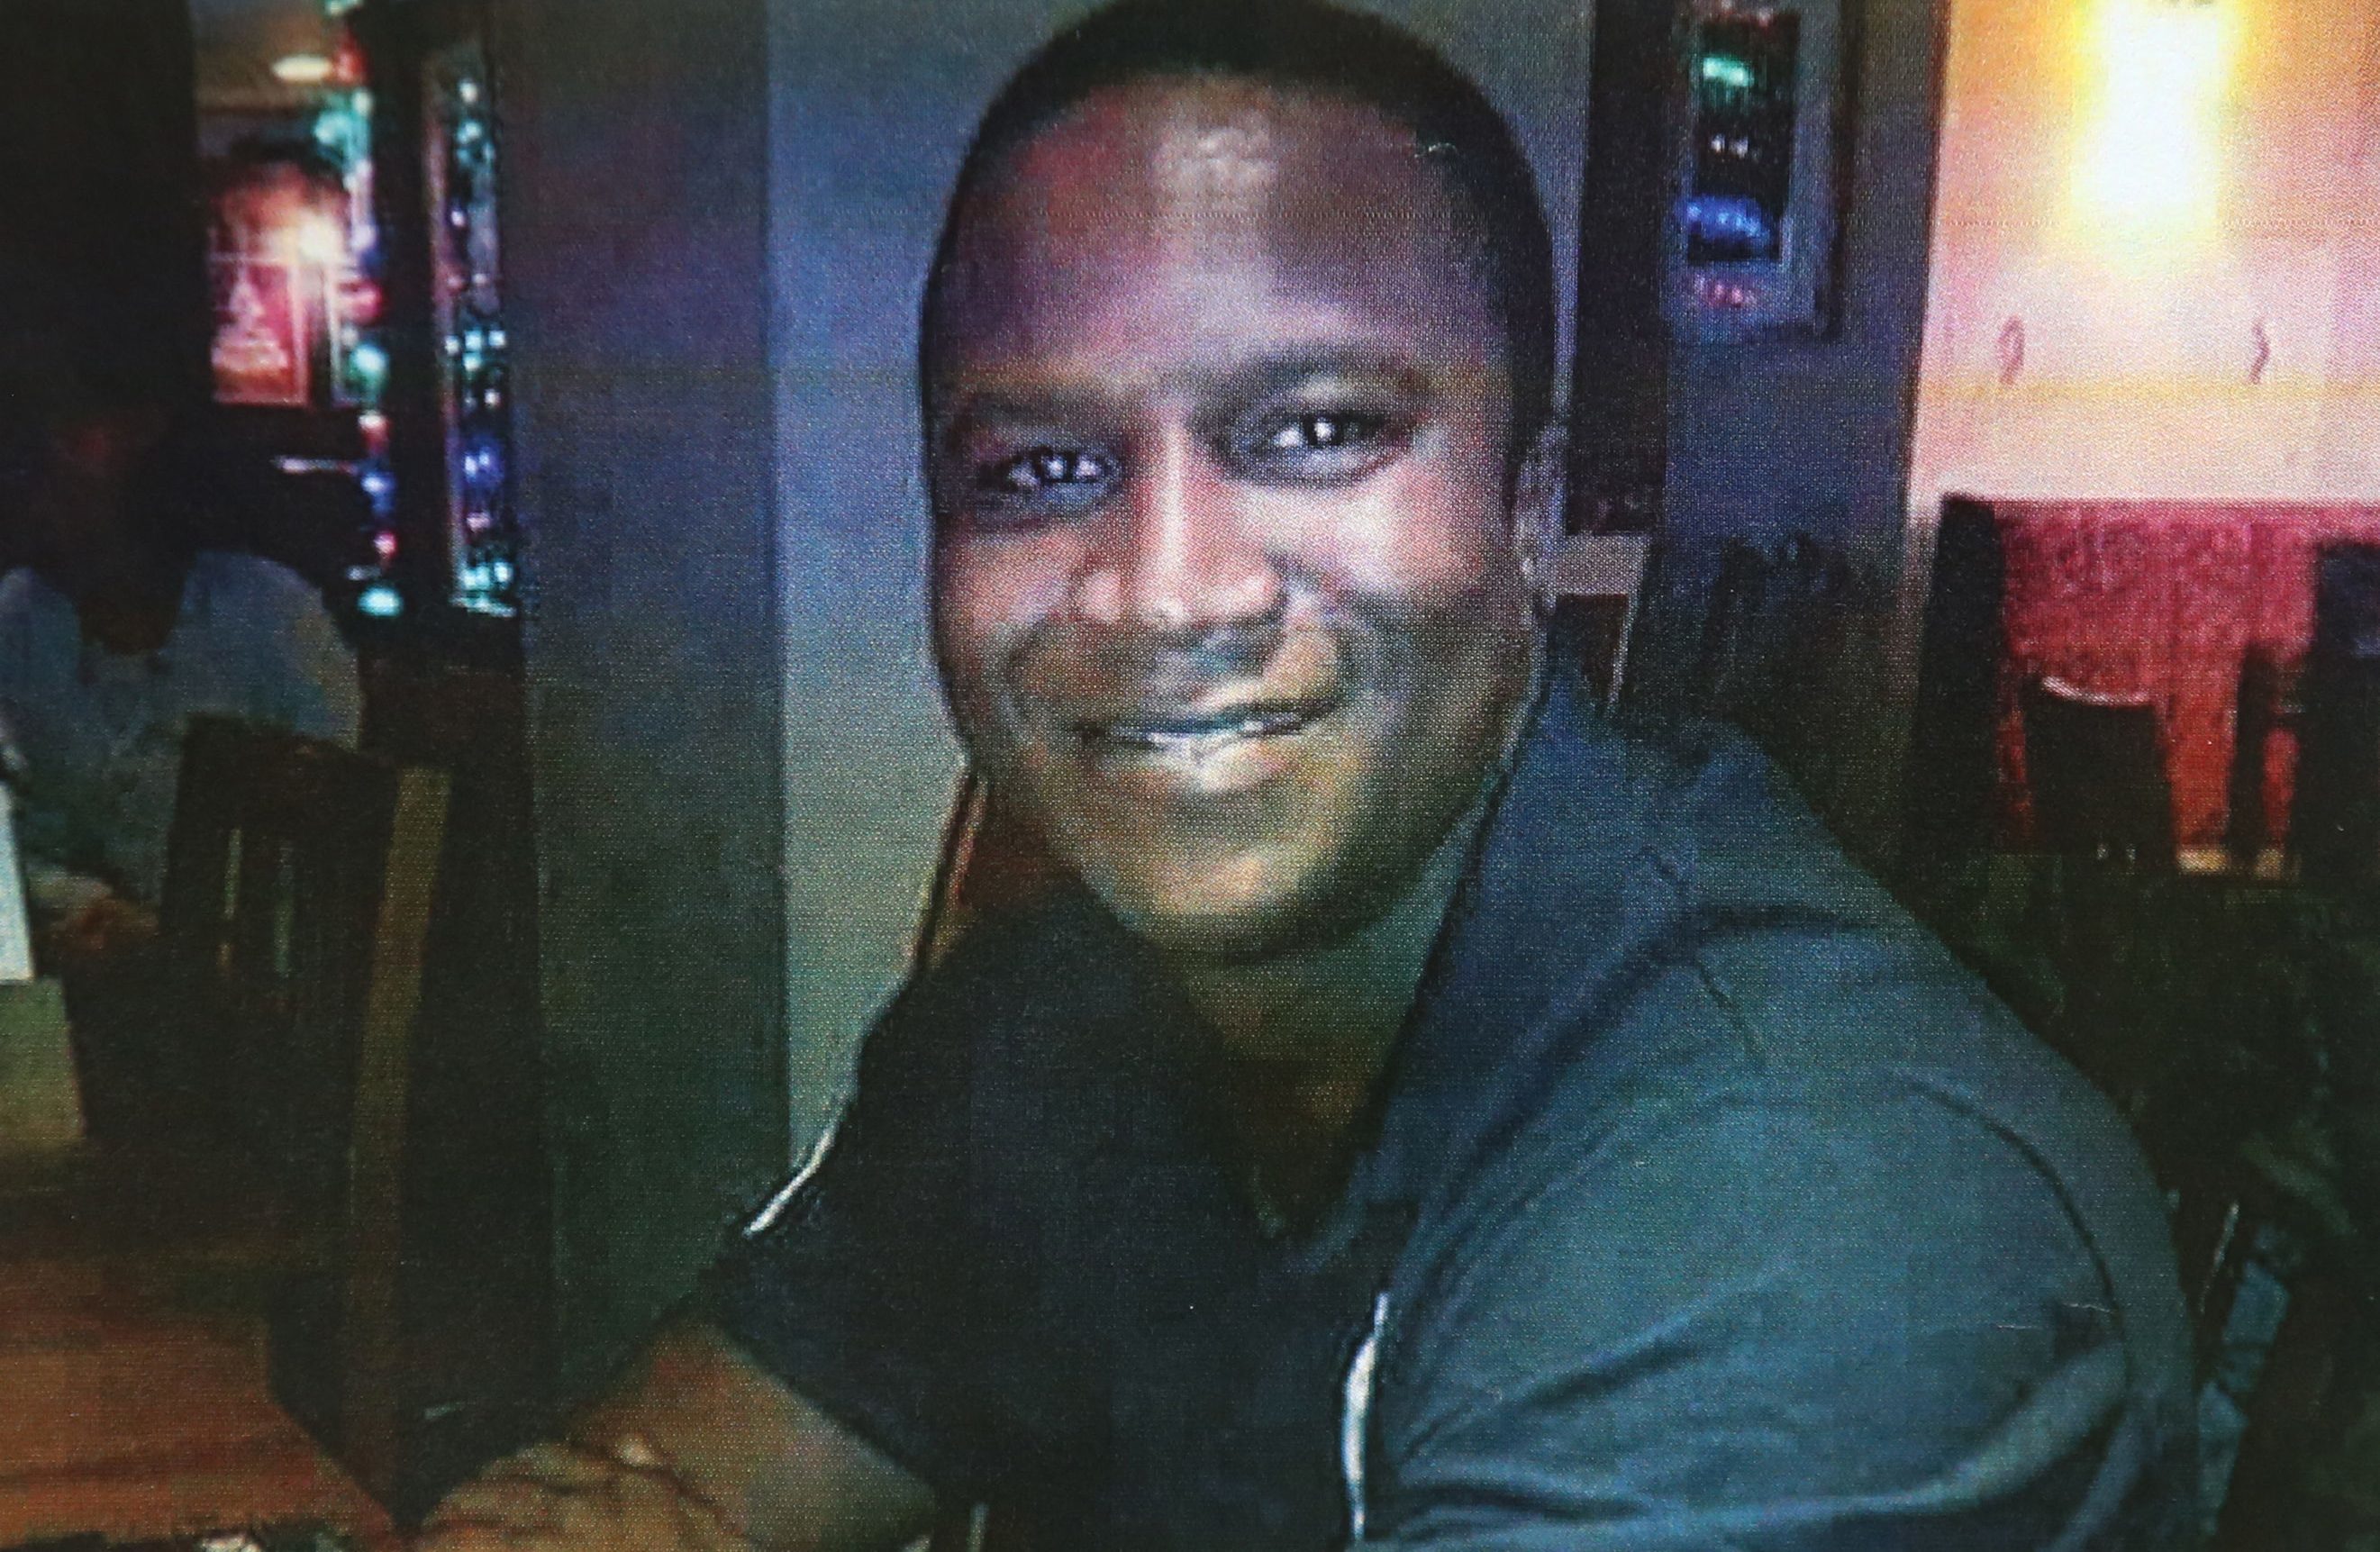 Sheku Bayoh, died while in police custody in Kirkcaldy in May 2015 after he was restrained by nine officers.